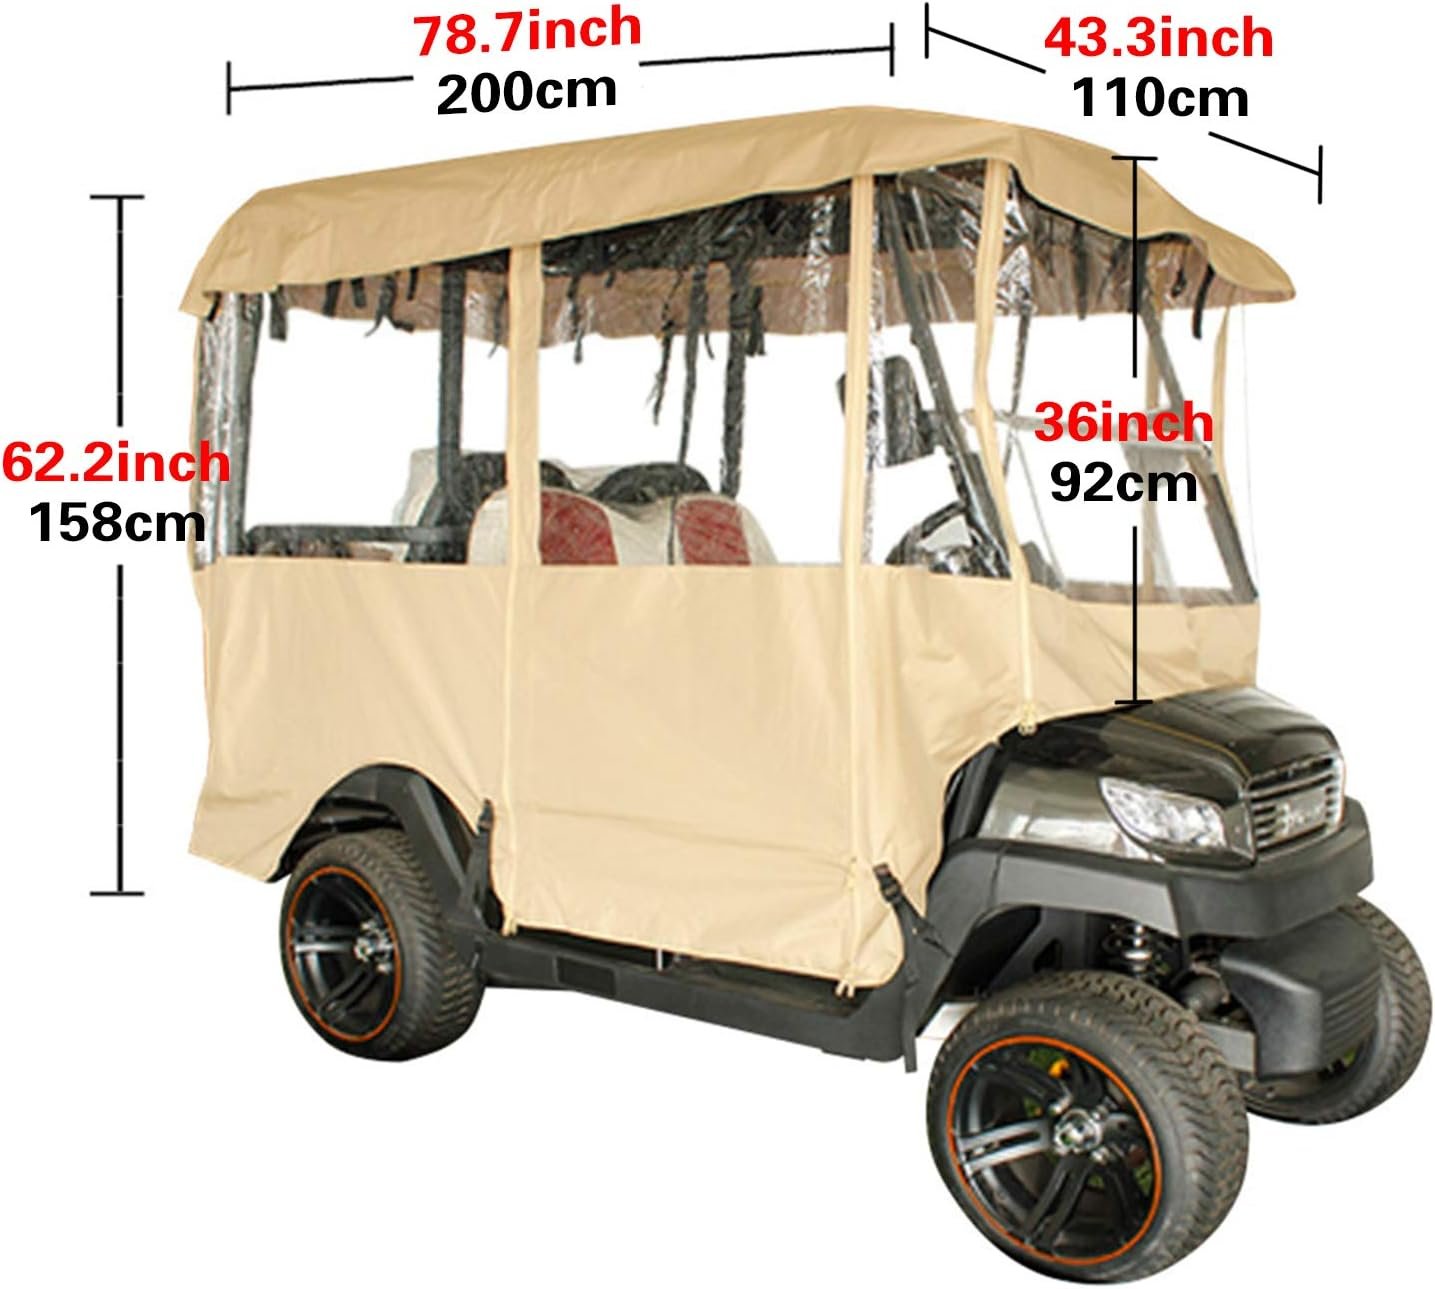 Happybuy Golf Cart Enclosure, 4-Person Golf Cart Cover, 4-Sided Fairway Deluxe, 300D Waterproof Driving Enclosure with Transparent Windows, Fit for EZGO, Club Car, Yamaha Cart (Roof Up to 78.7L)